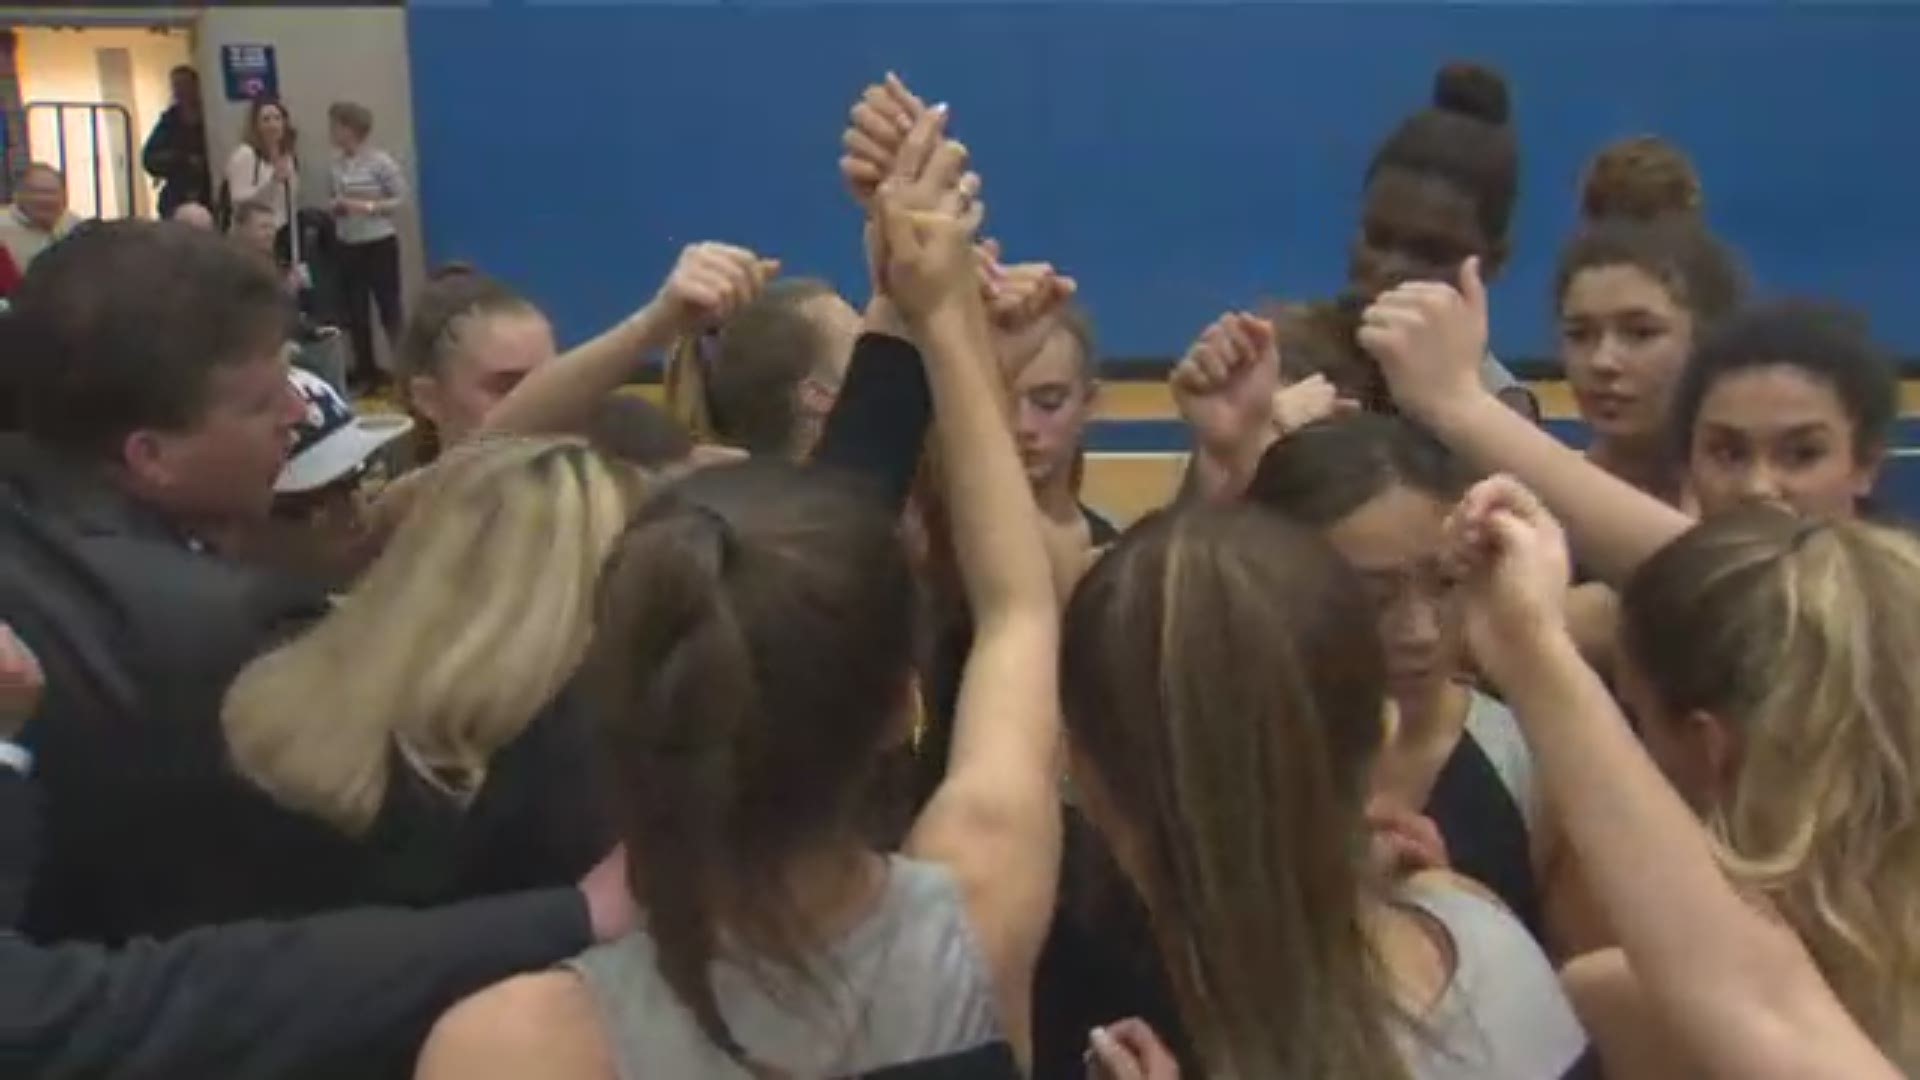 Highlights of the West Linn Lions 2019 girls basketball team. Highlights were part of KGW’s Friday Night Hoops coverage. #KGWPreps